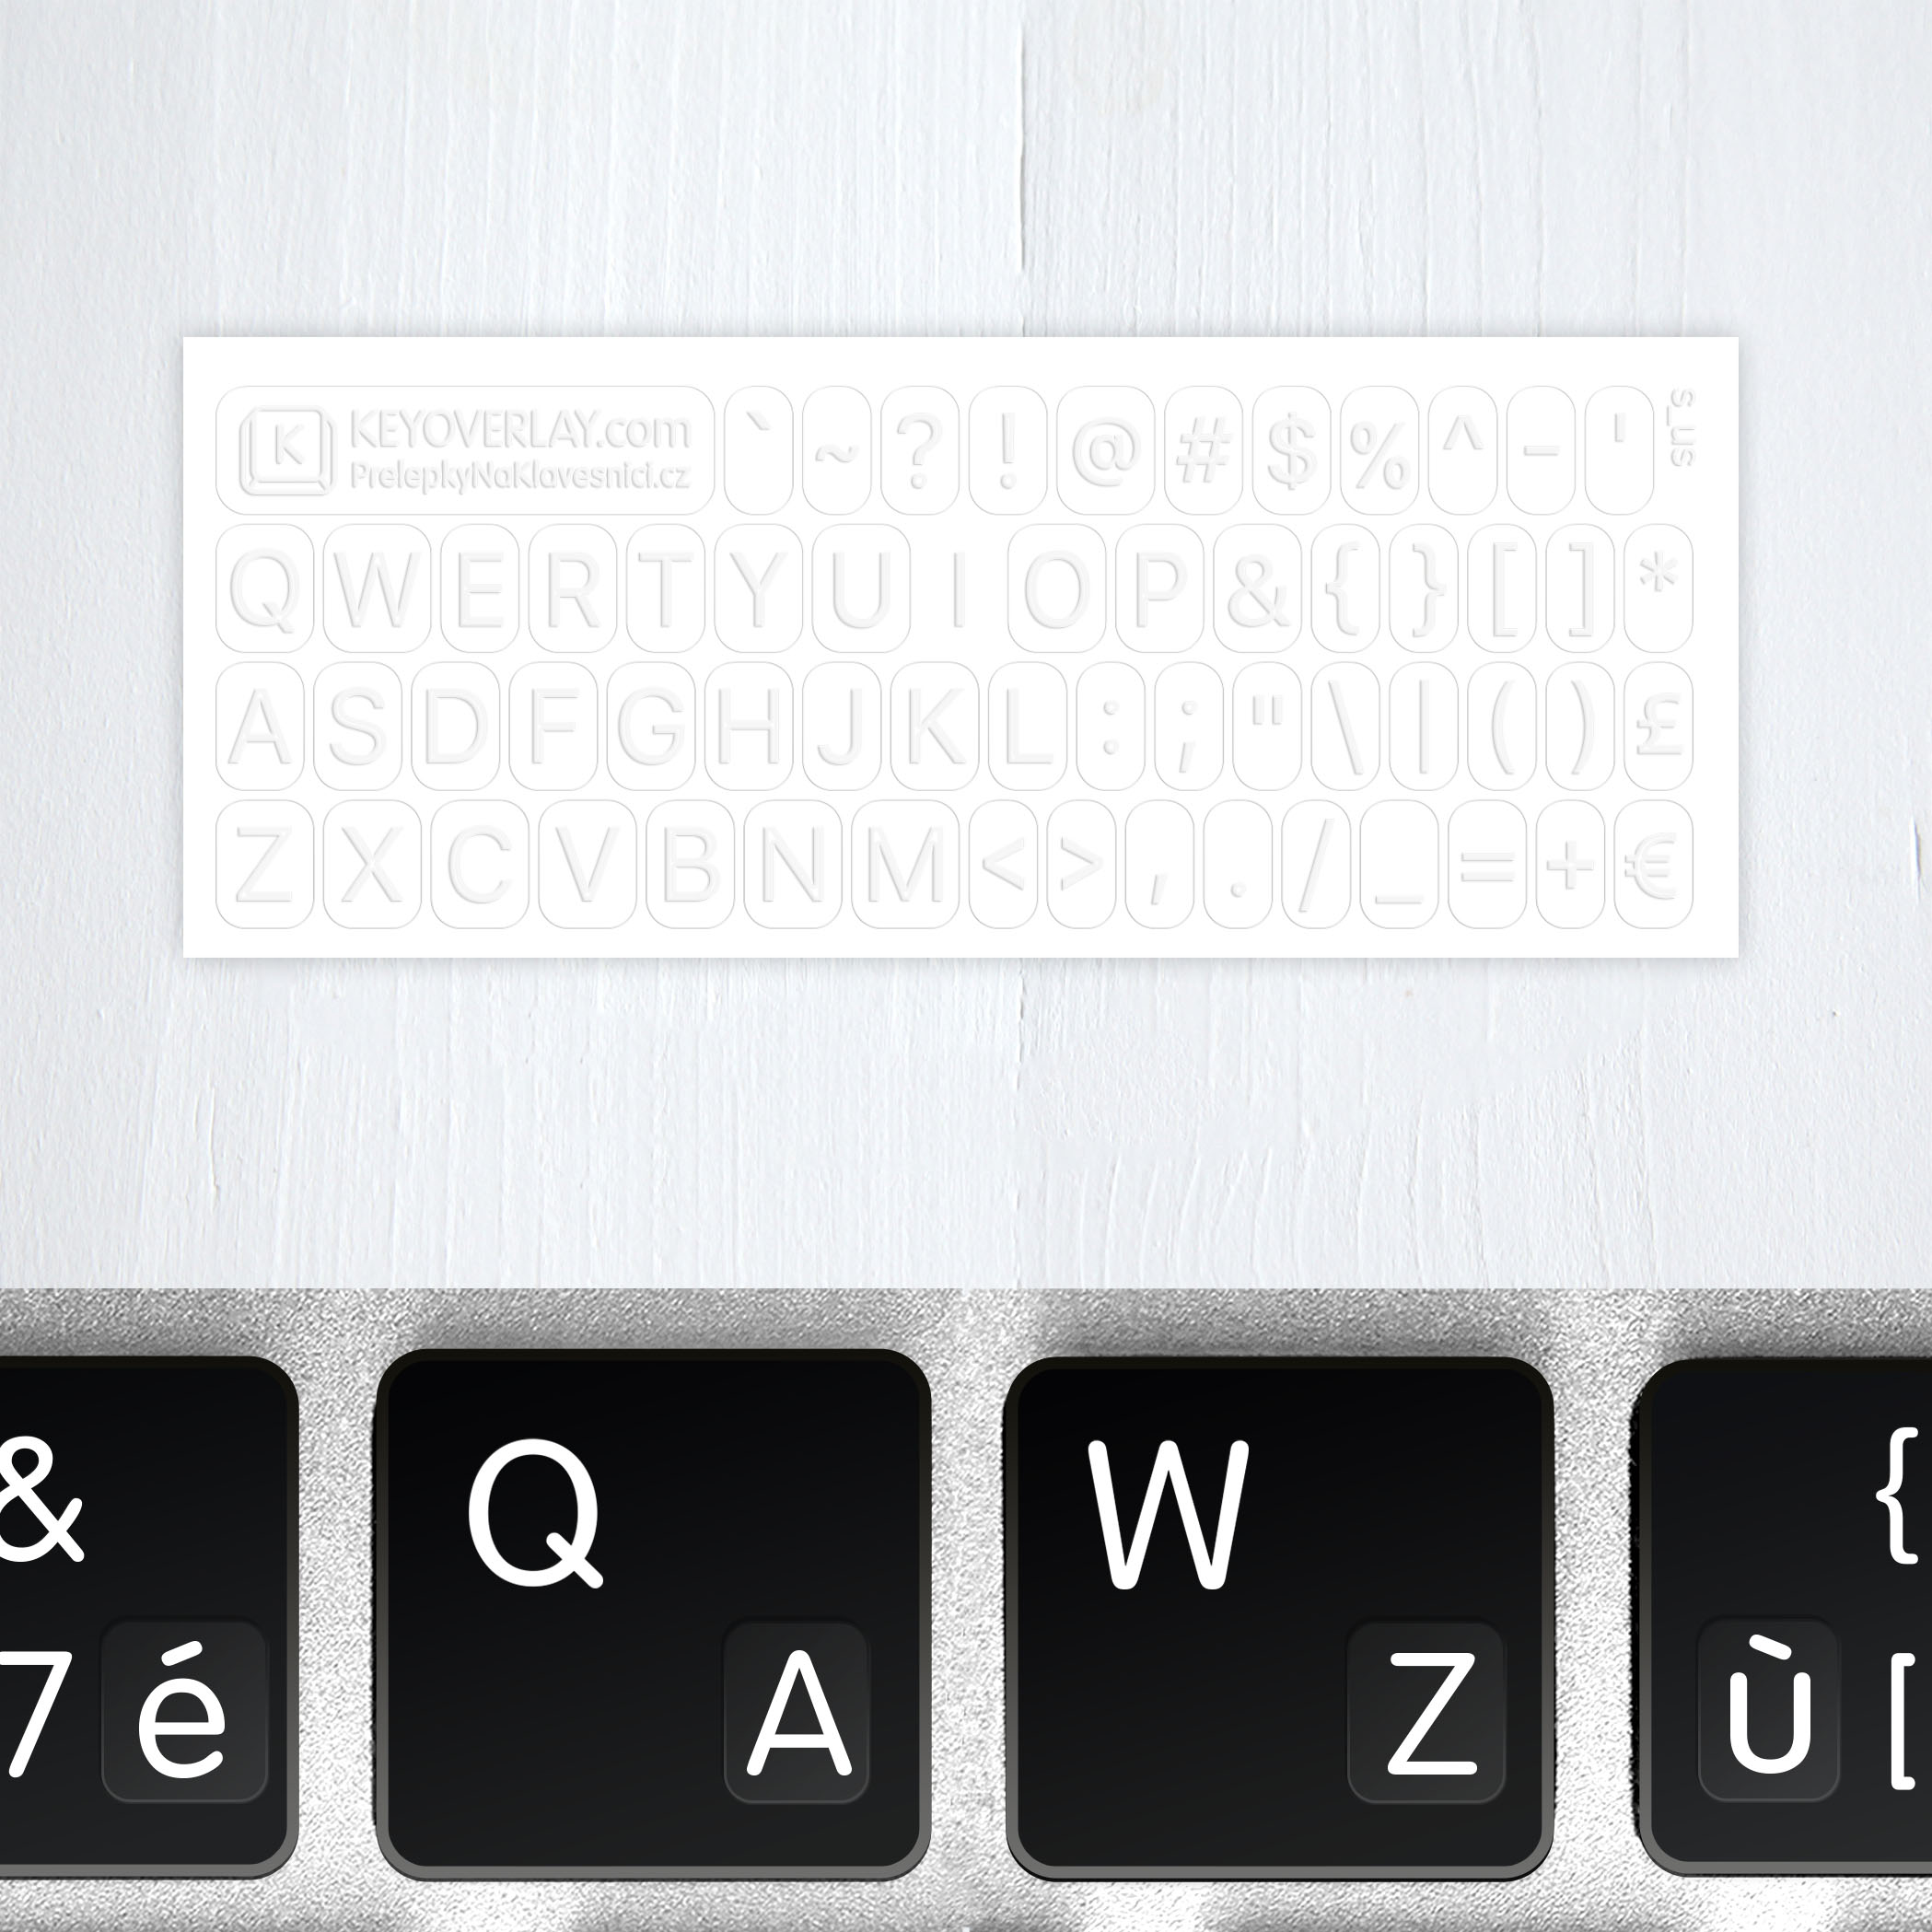 English Alphabet and Punctuation Symbols – Small Keyboard Transparent Stickers